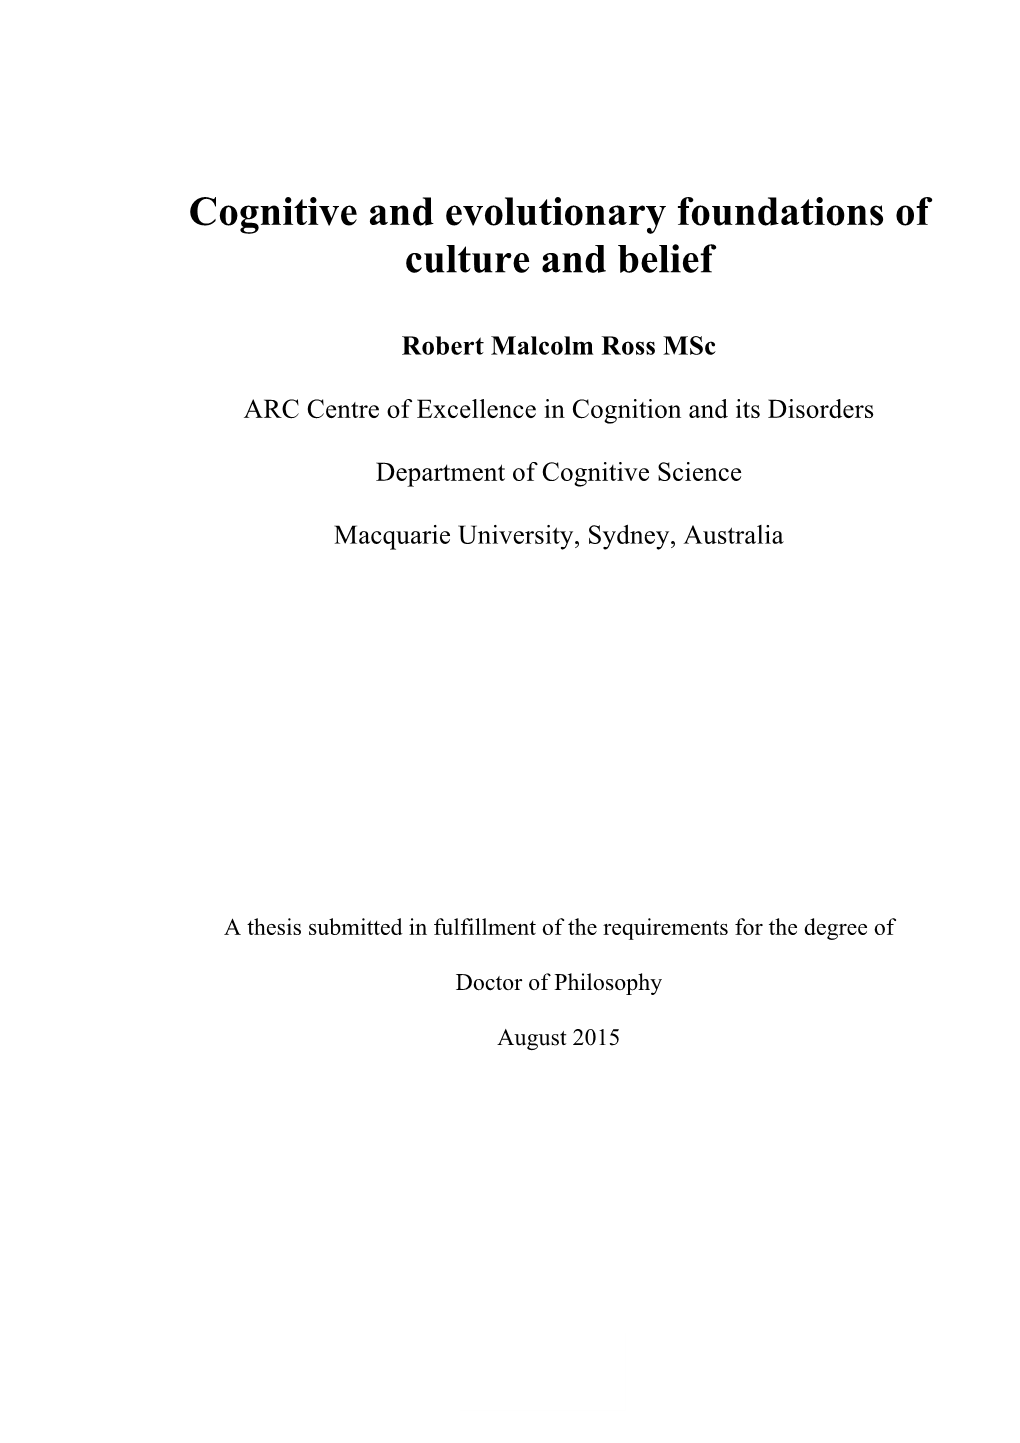 Cognitive and Evolutionary Foundations of Culture and Belief